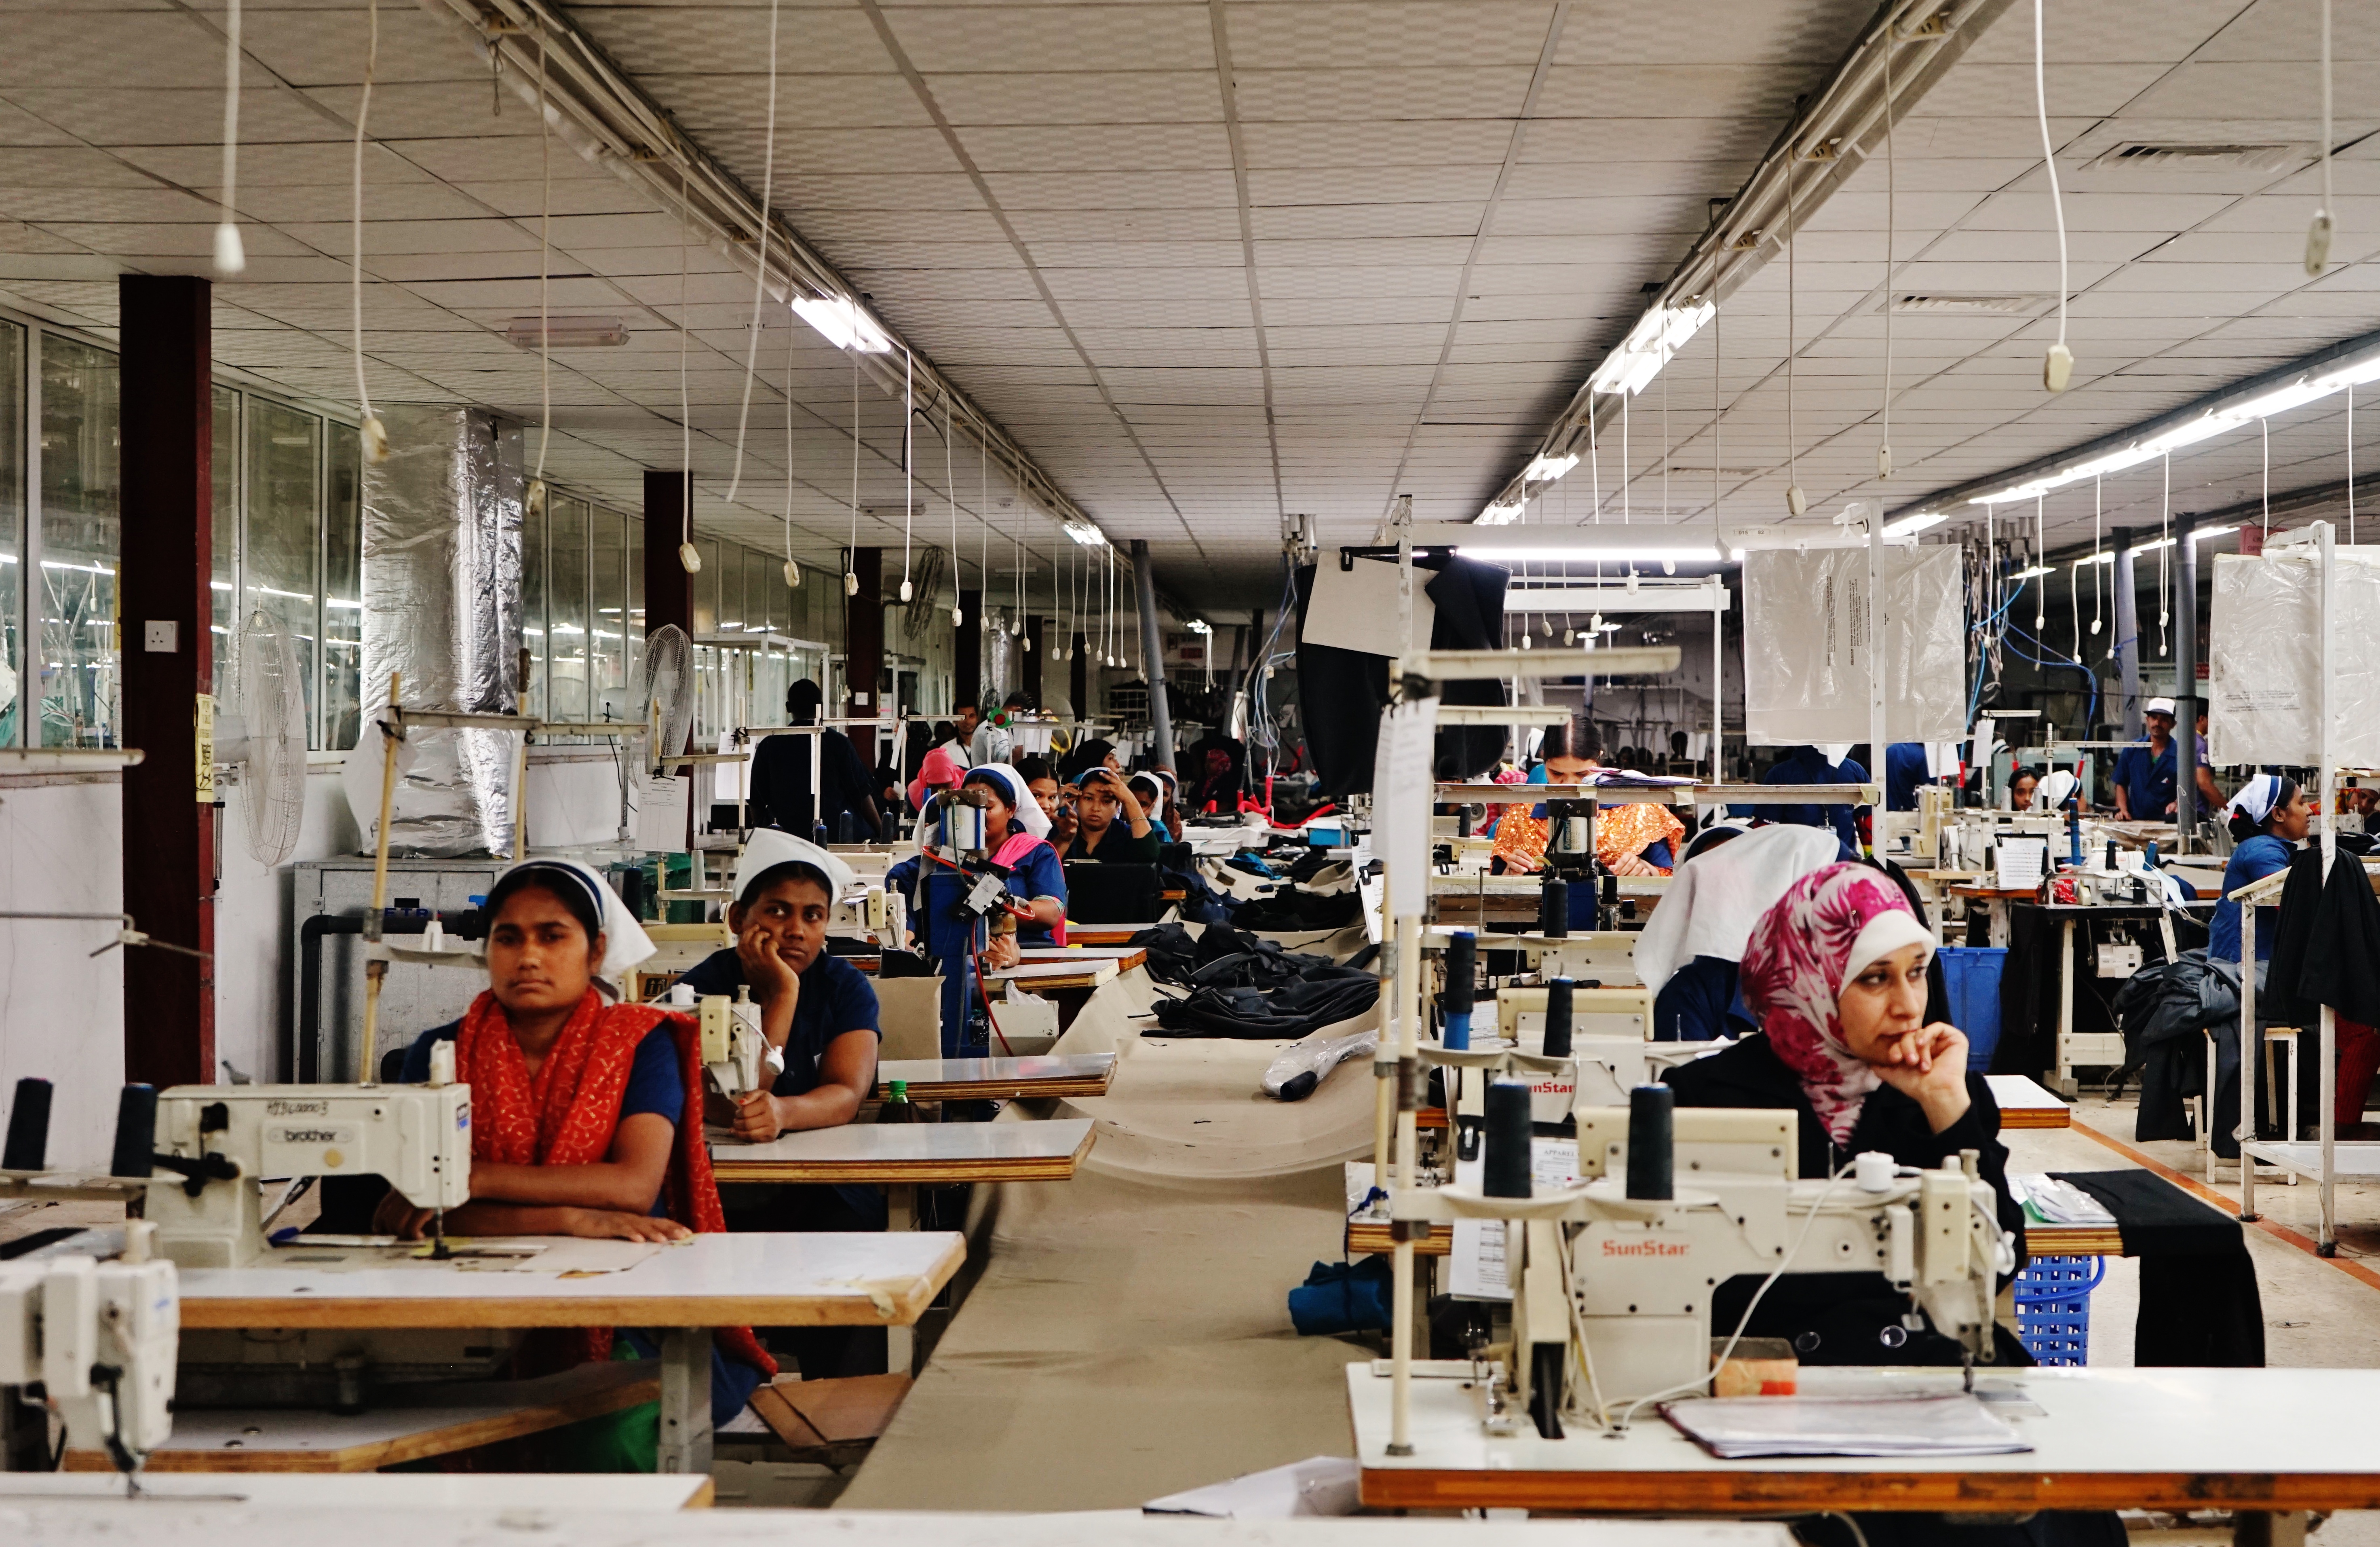 South Asian migrant workers in a garment factory in Jordan. Photo by Sabrina Toppa.